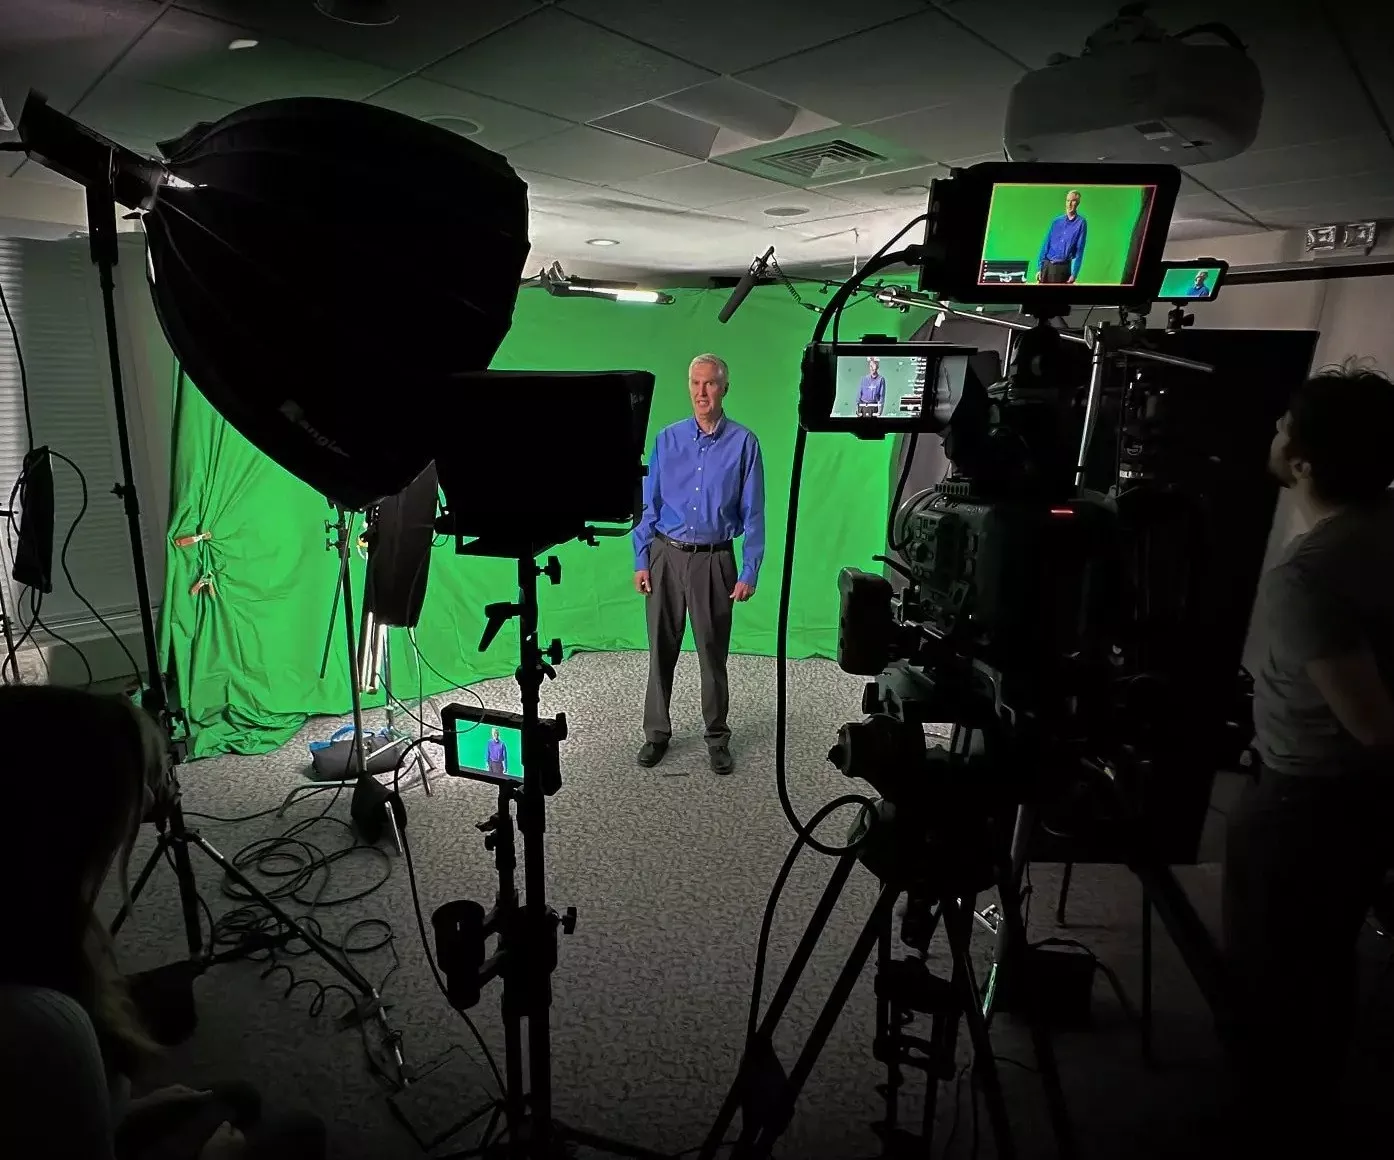 An RI Videographer filming a man in front of a green screen